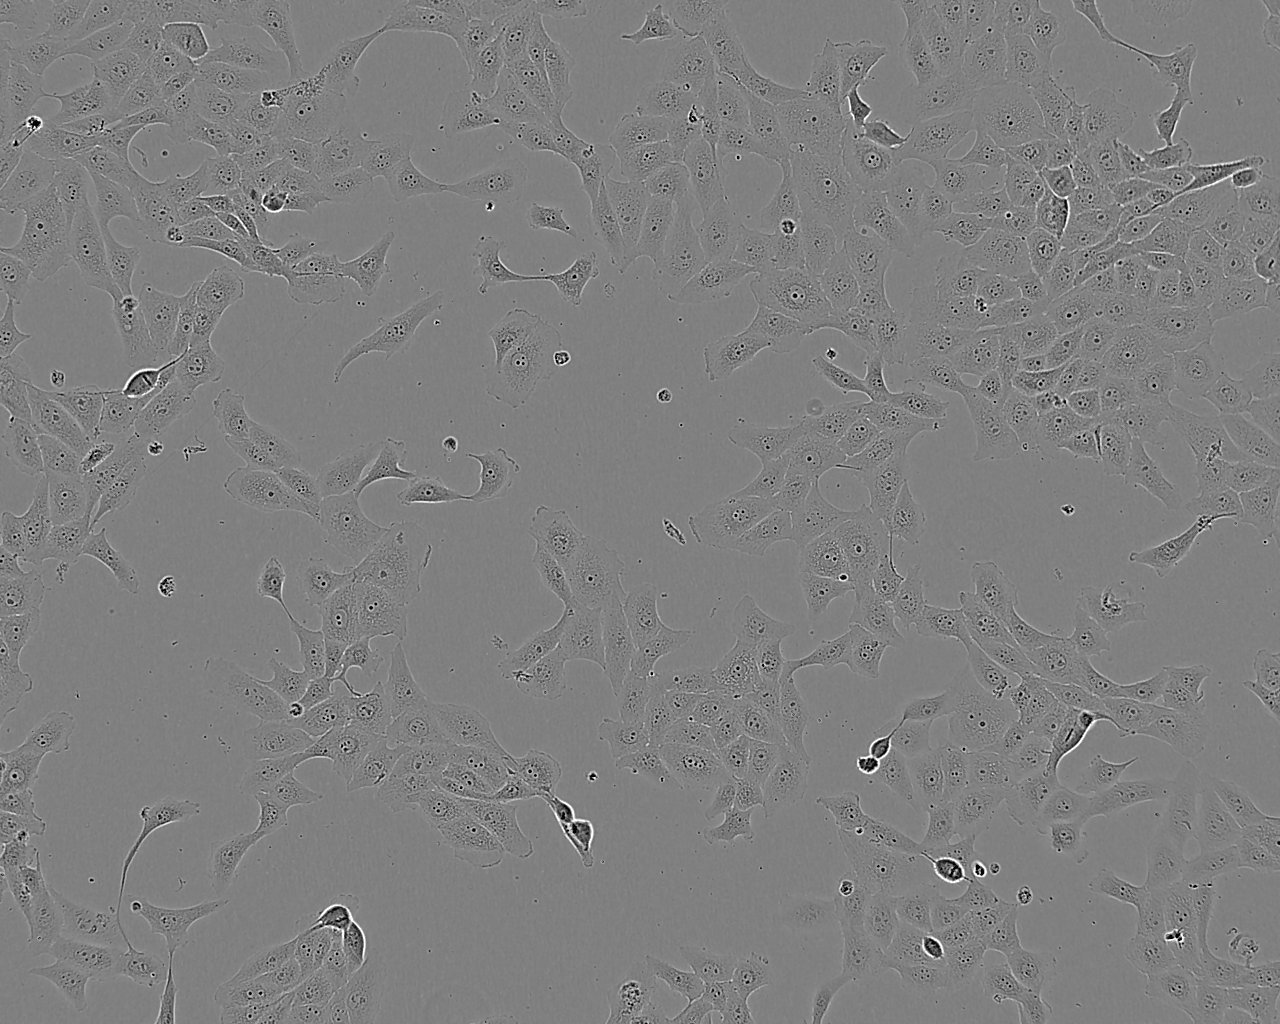 CAL-12T cell line人肺癌细胞系,CAL-12T cell line